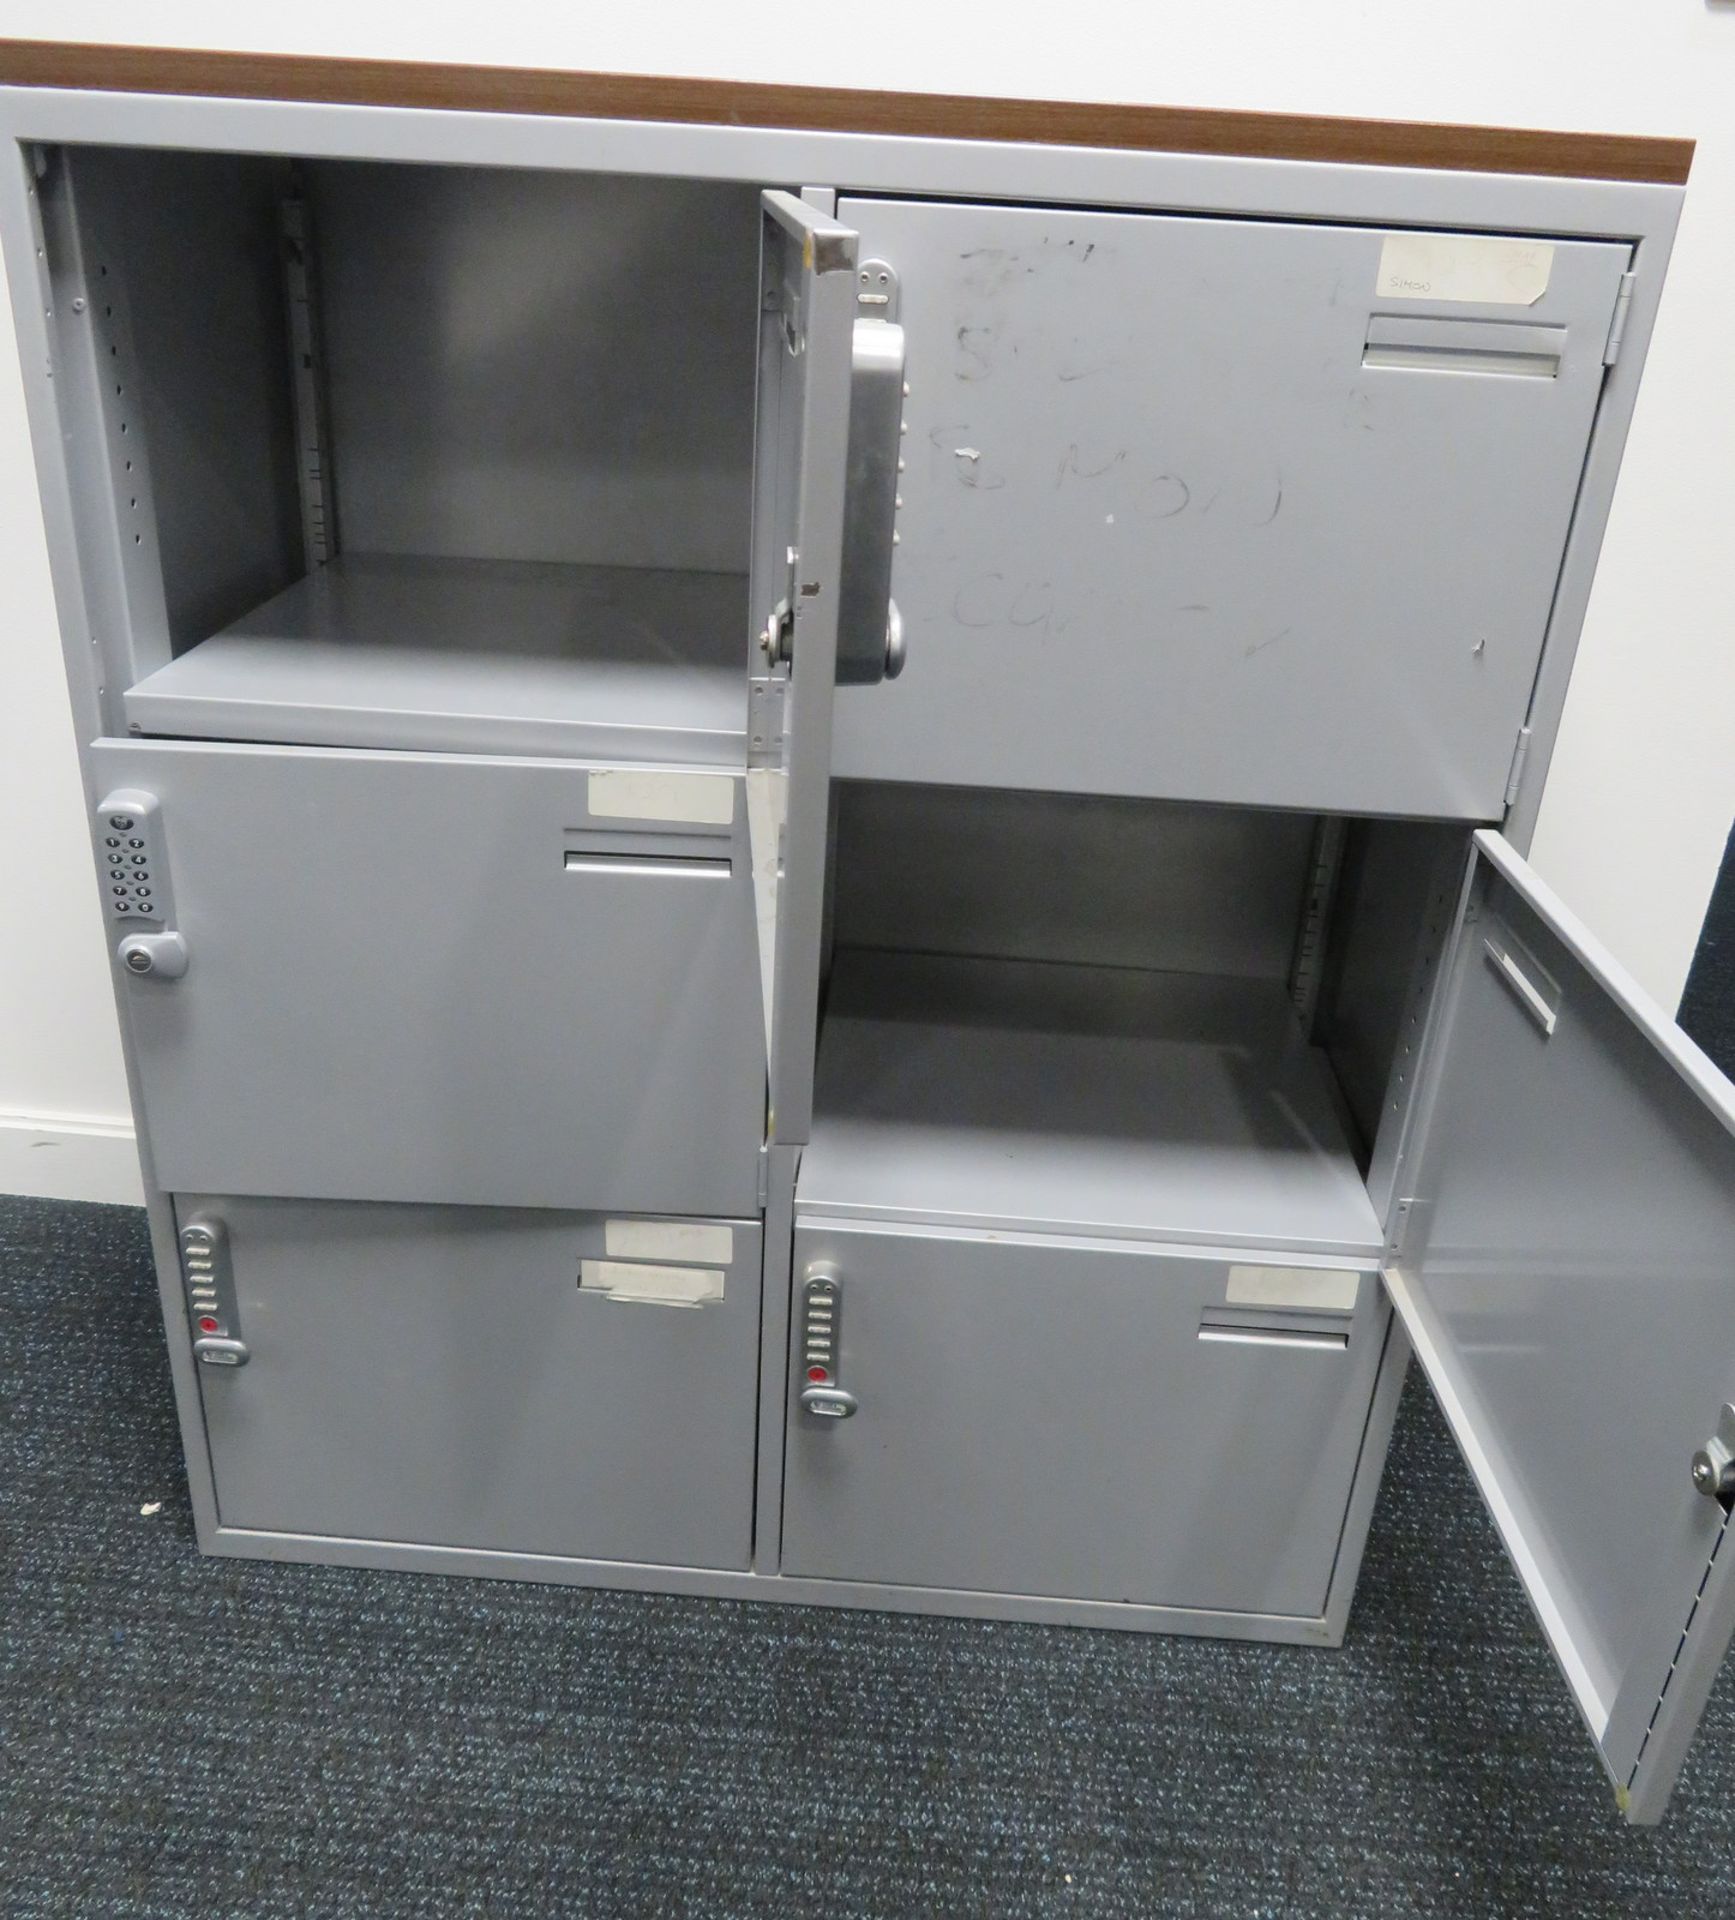 5x Bank Of 6 Lockers. This Is An Overview Picture And You Will Receive One In Similar Condition. - Image 5 of 6